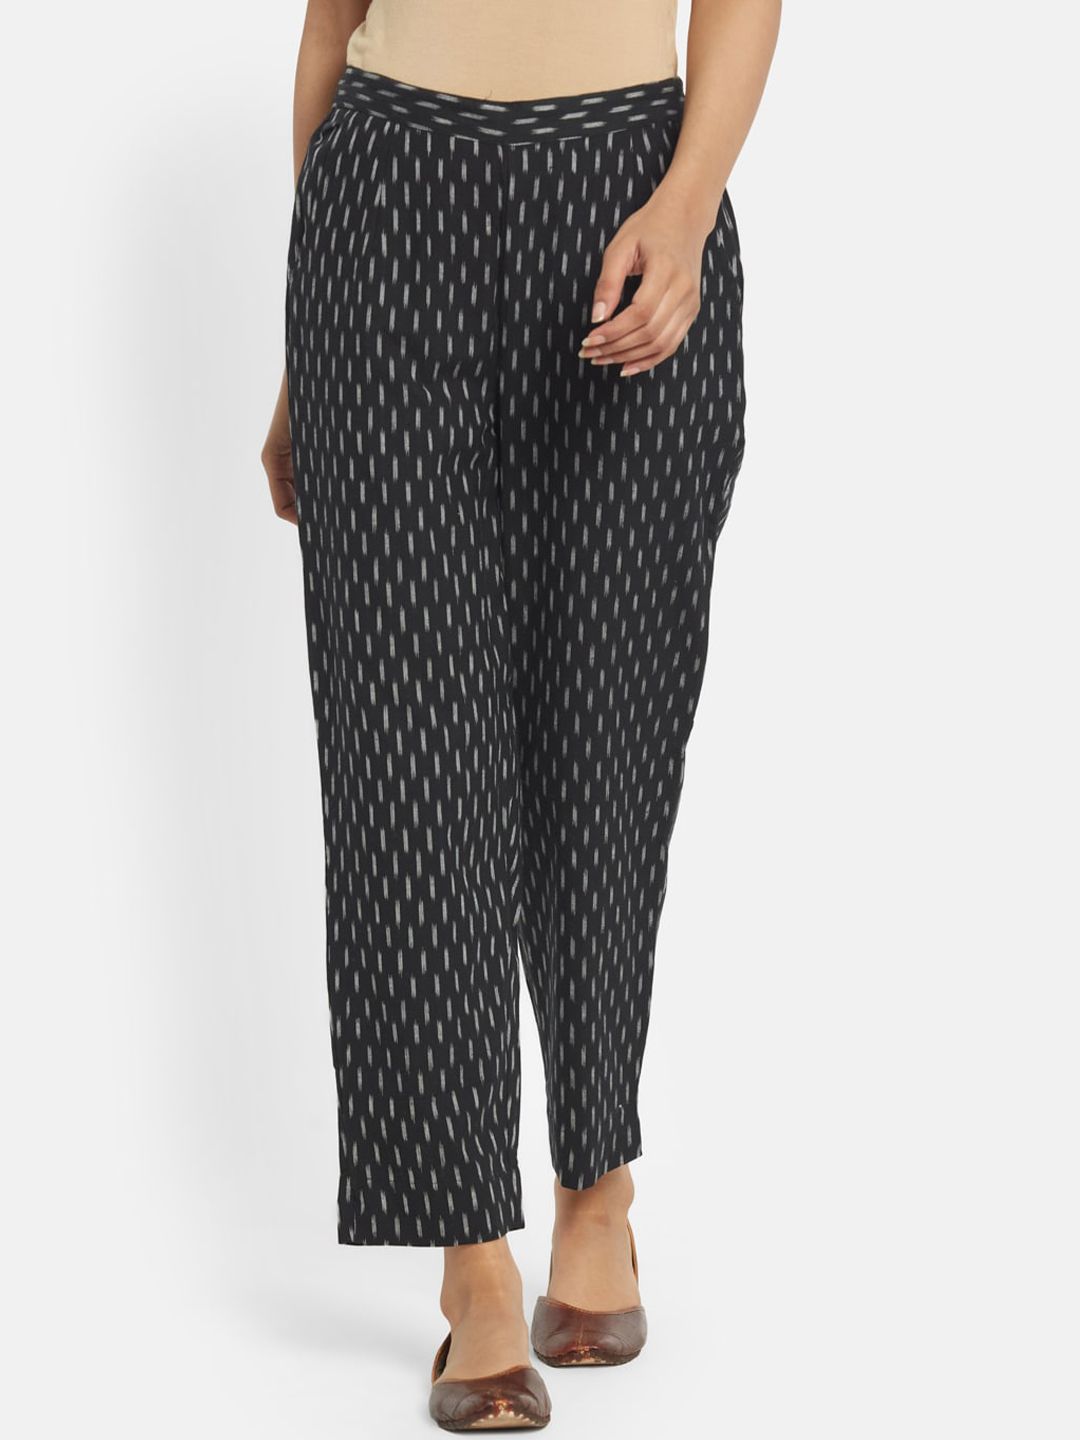 Fabindia Women Black Printed Tapered Cotton Trousers Price in India